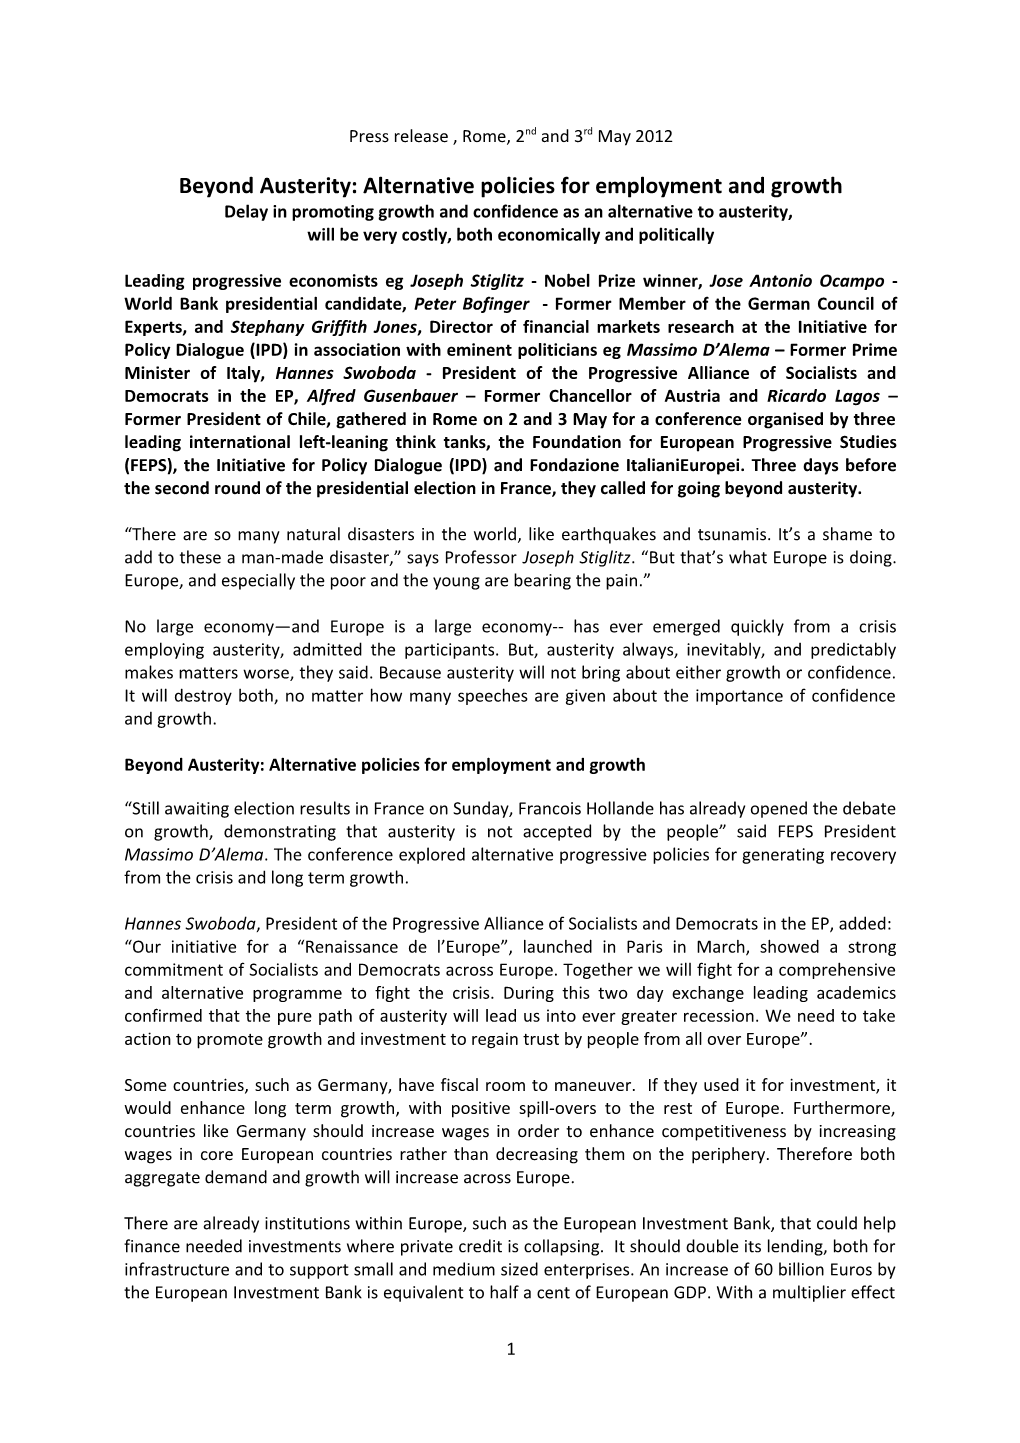 Press Release , Rome, 2Nd and 3Rd May 2012